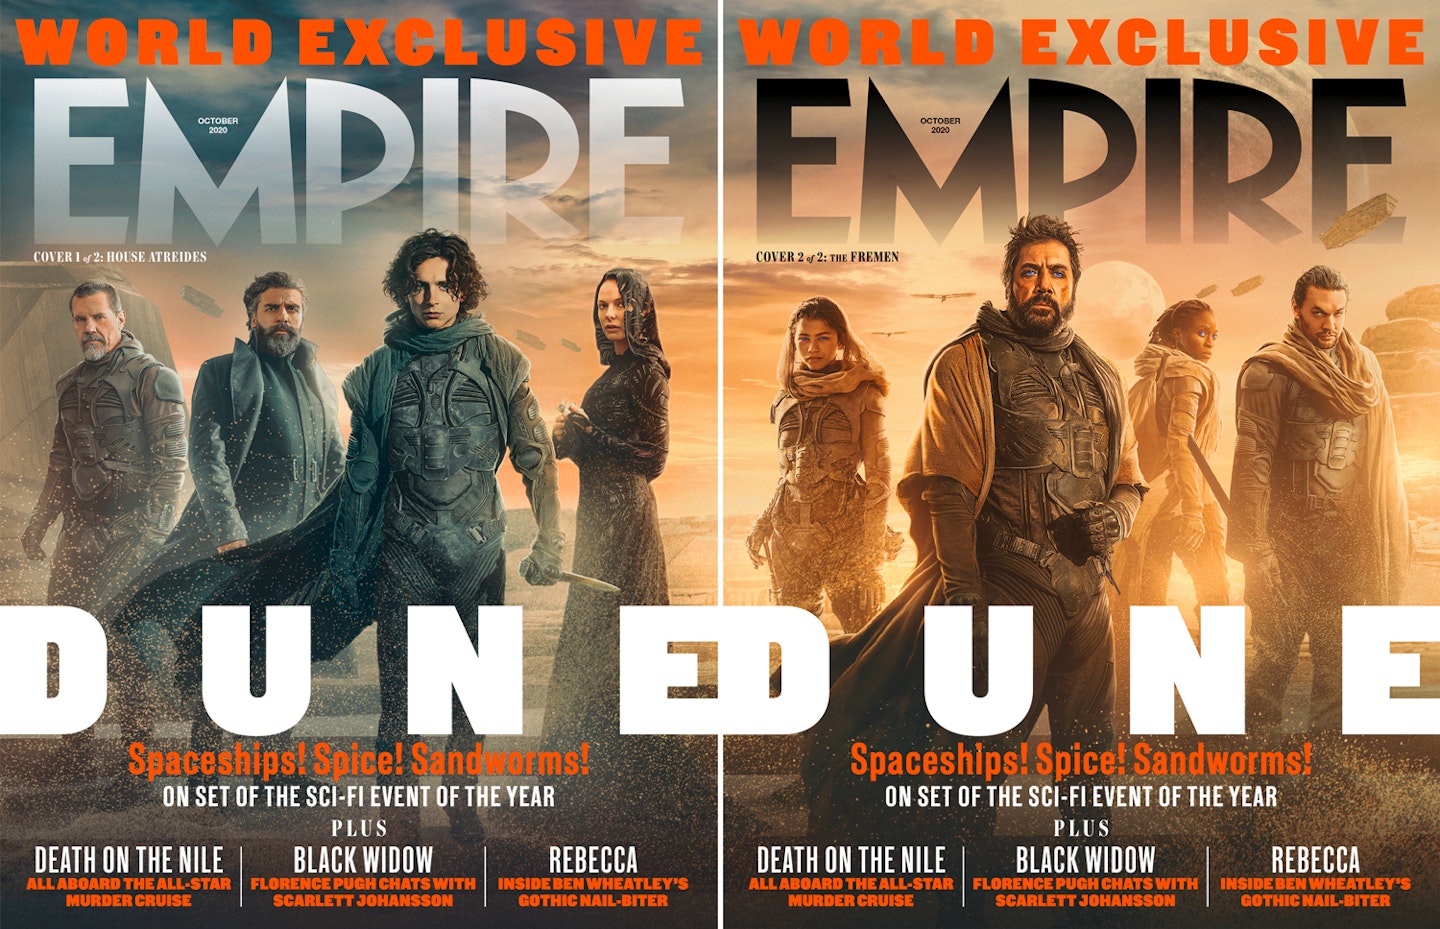 Empire October 2020 – Dune Covers